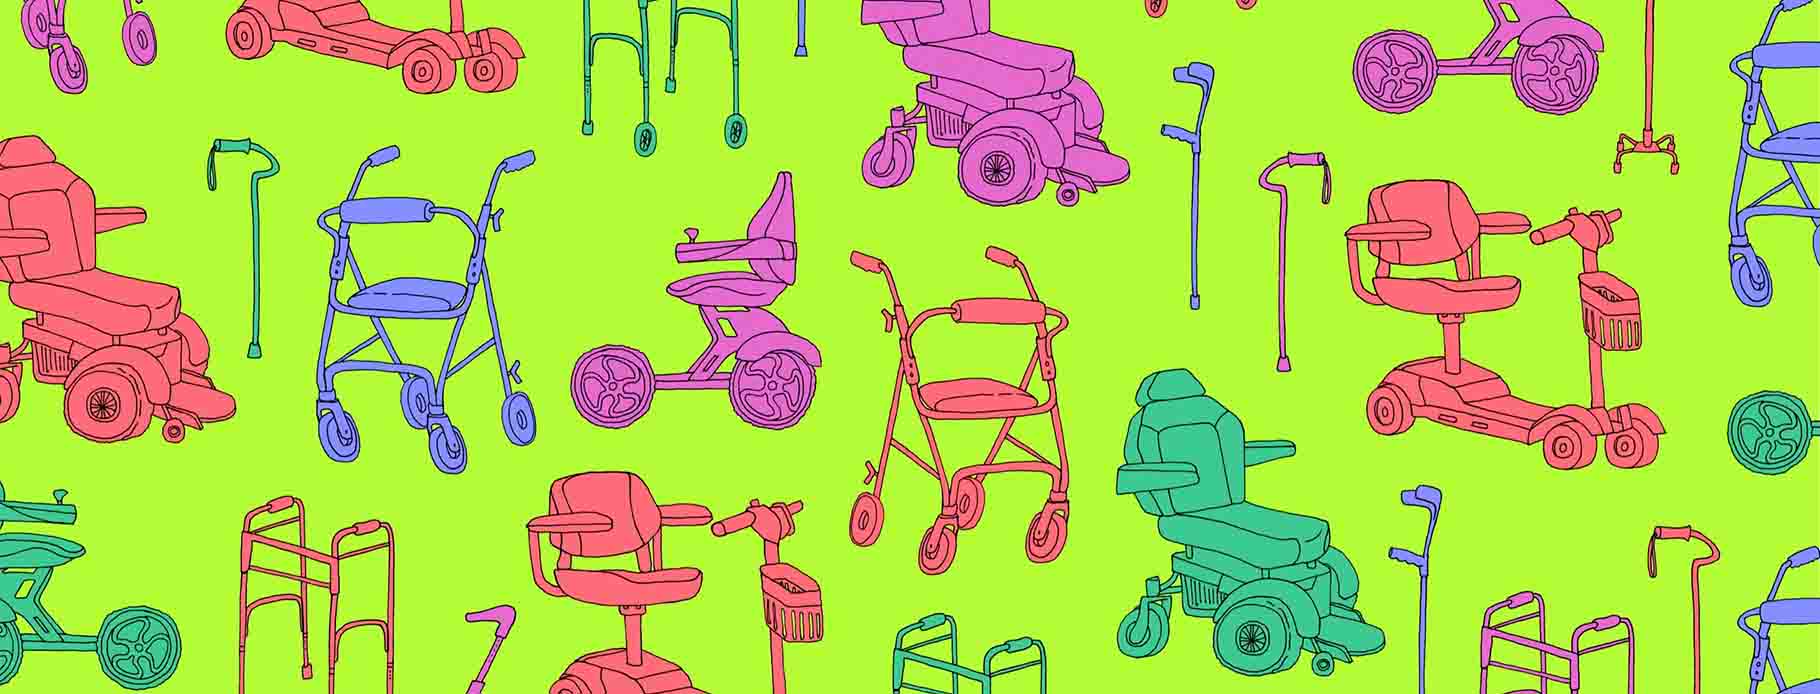 A colorful patterned assortment of mobility devices